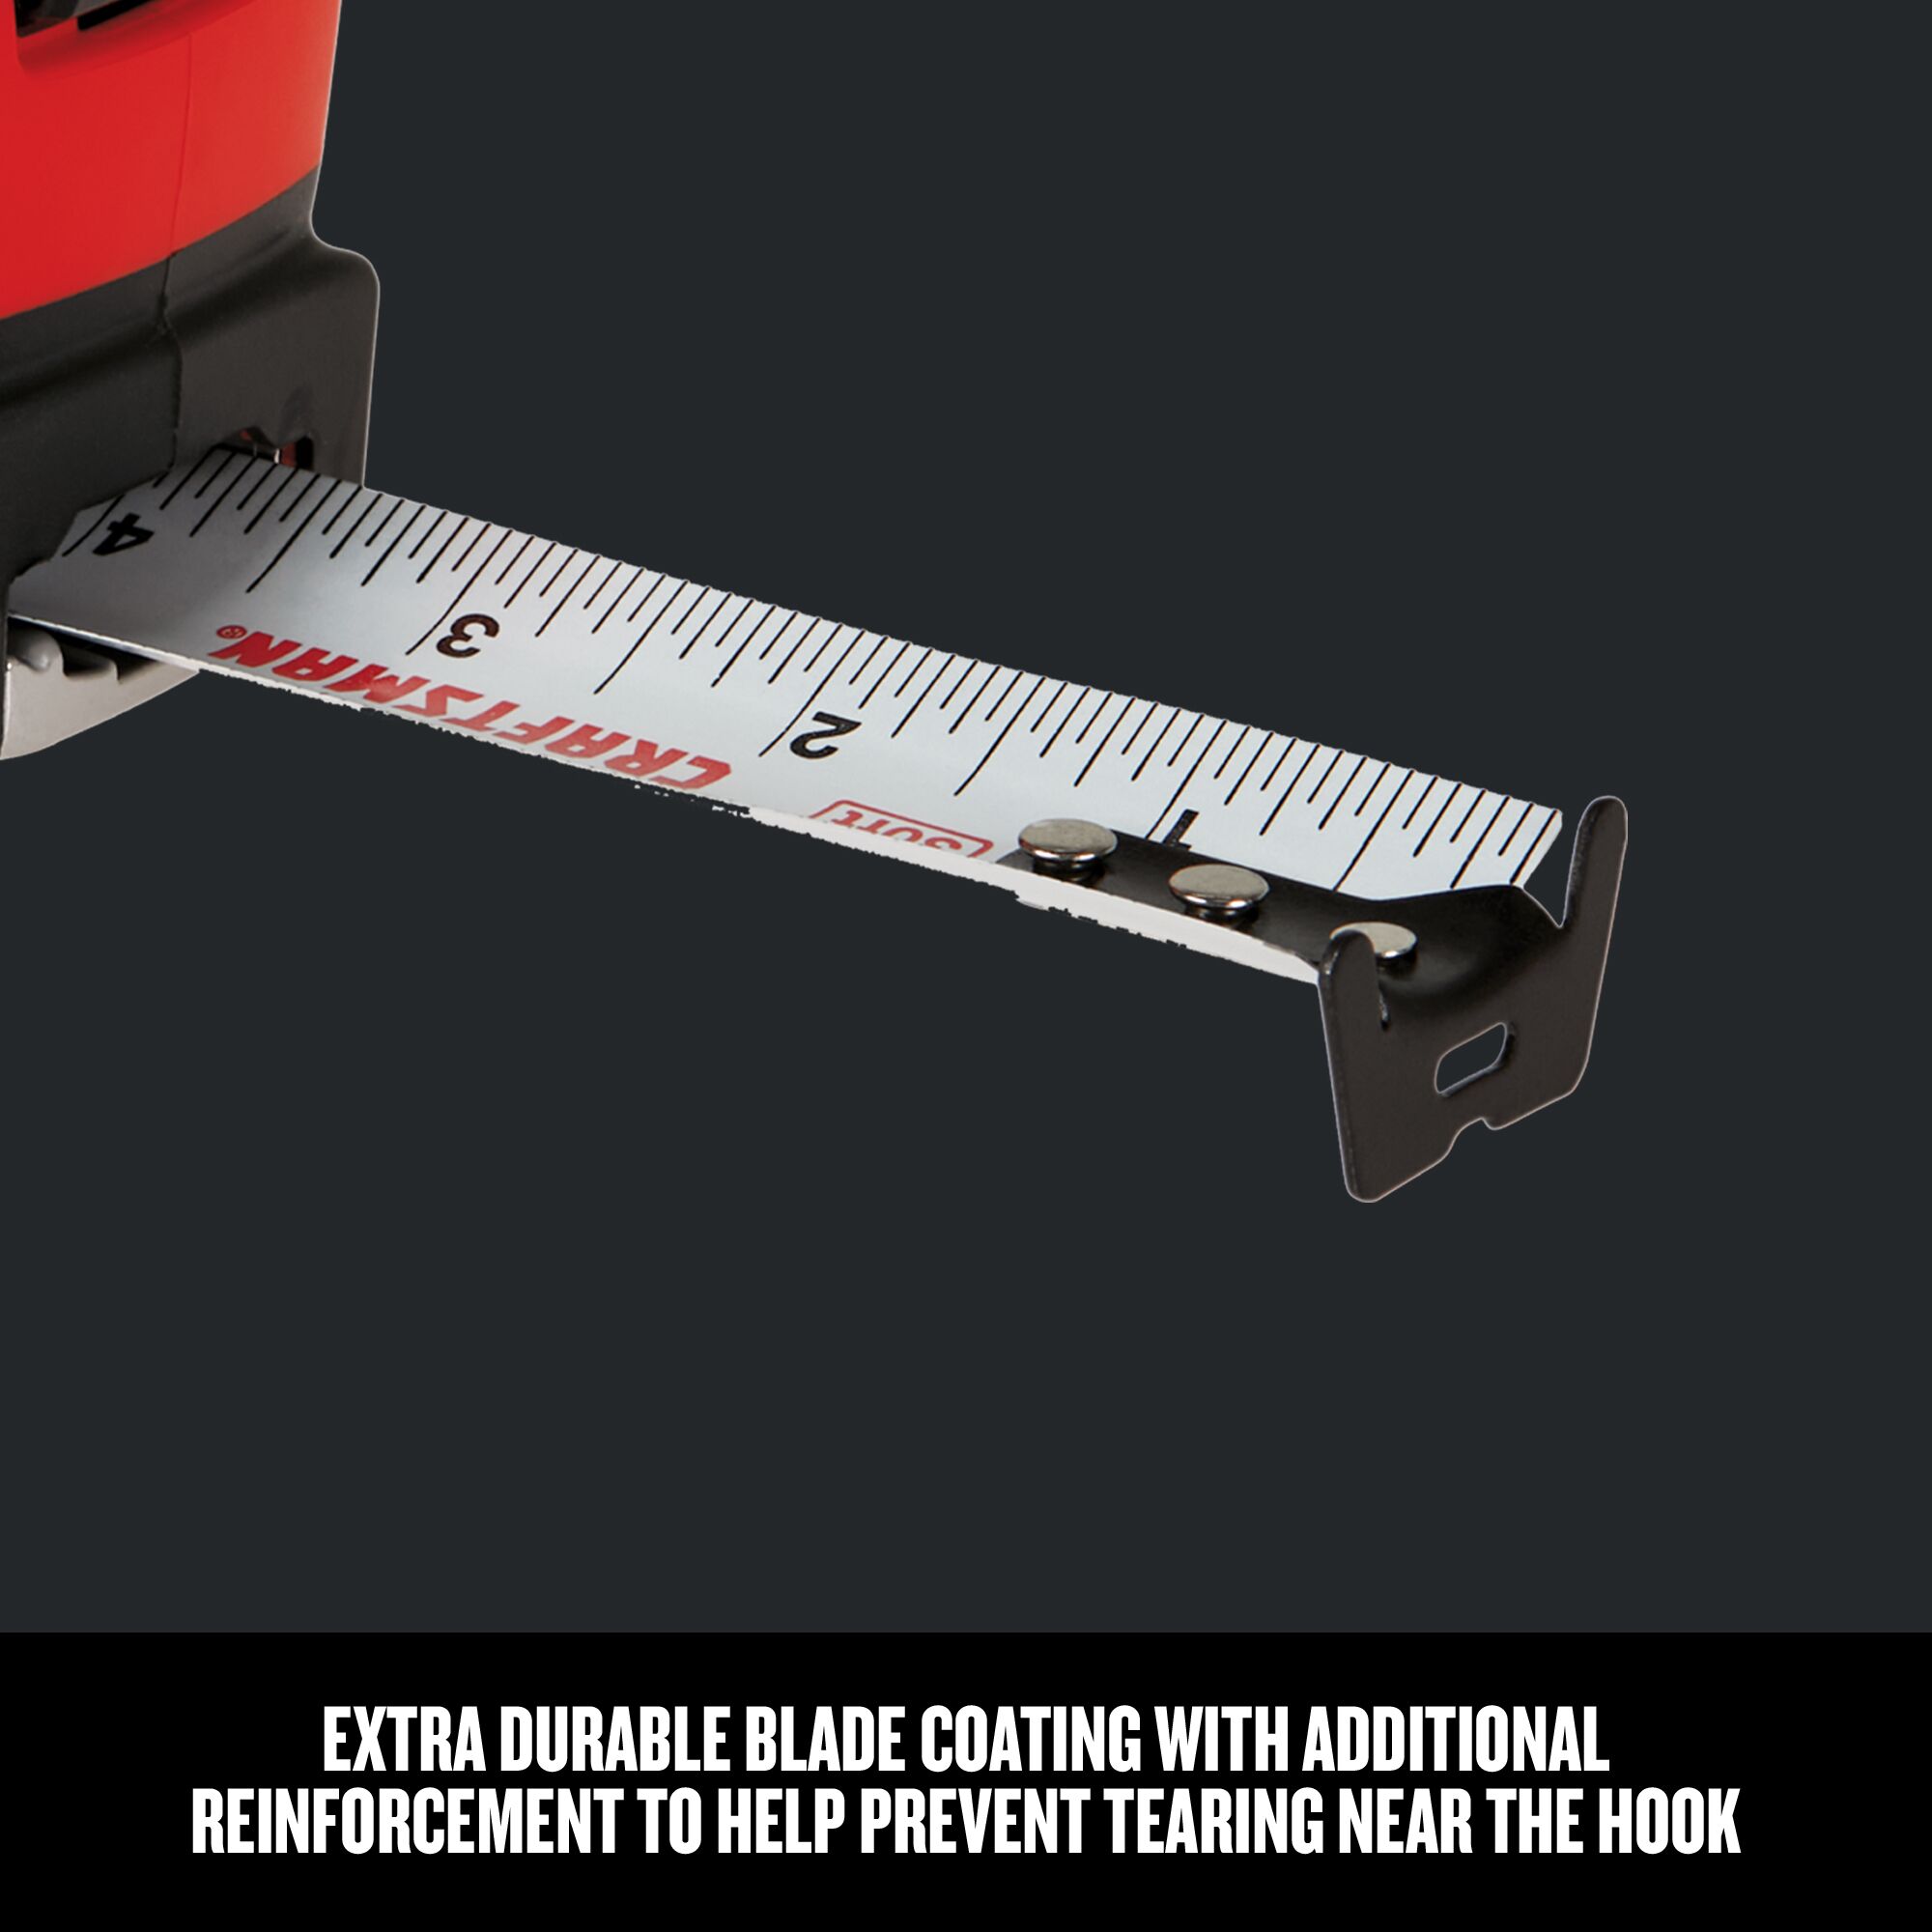 Graphic of CRAFTSMAN Measuring: Short Tapes highlighting product features